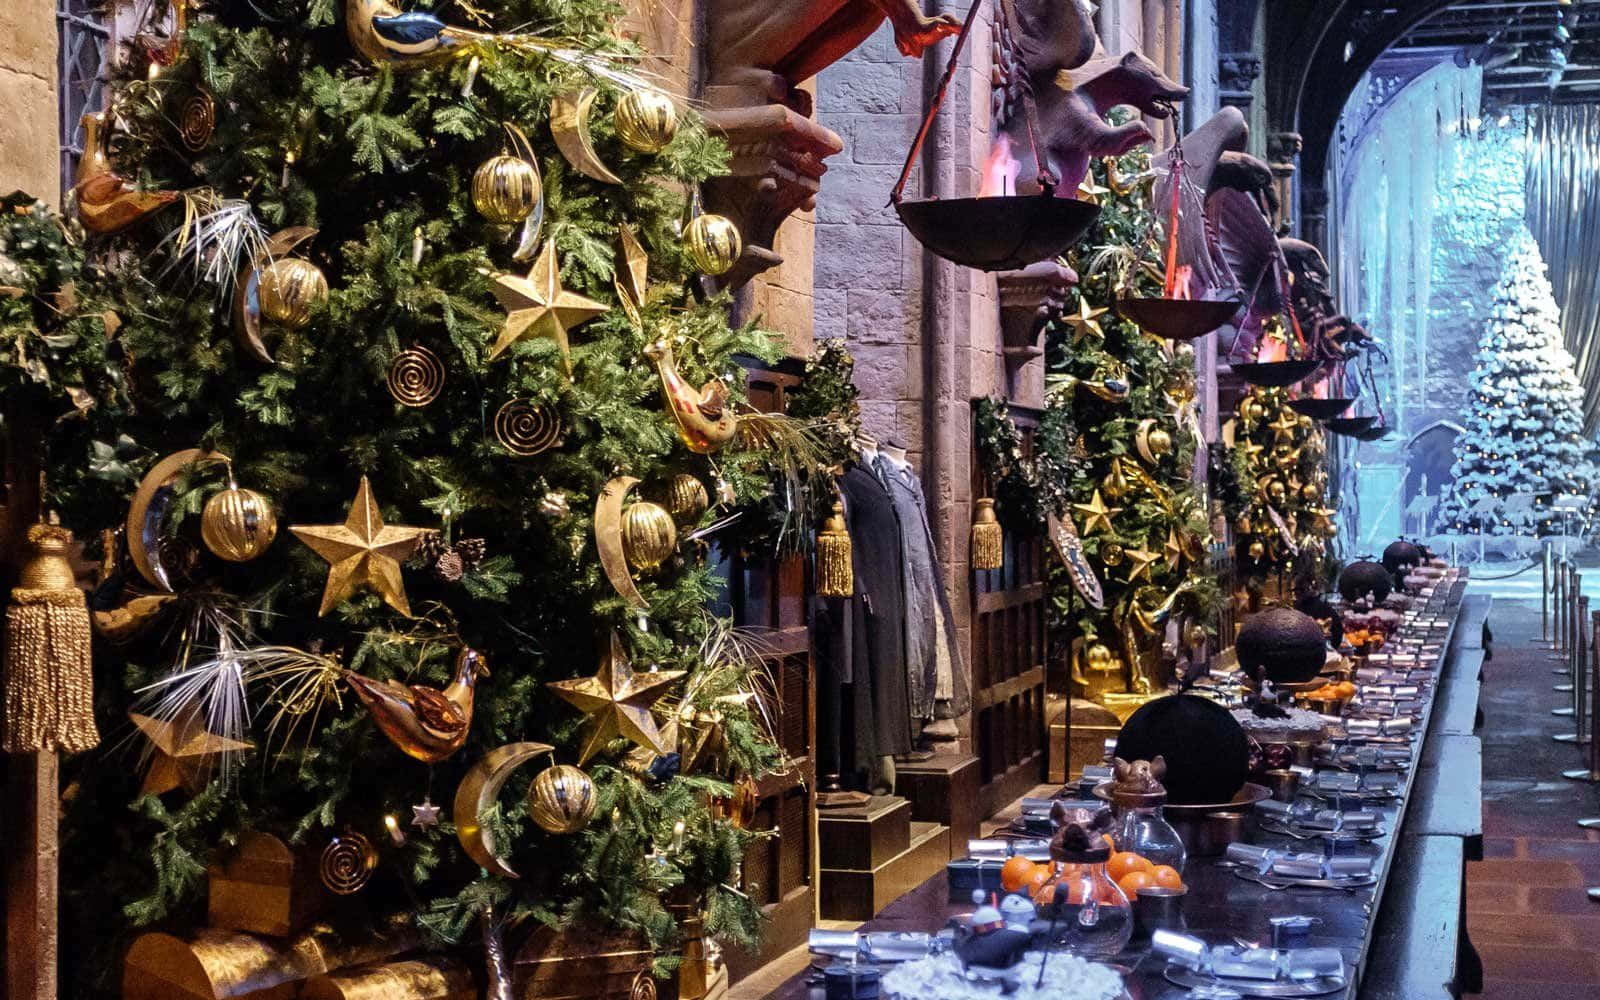 Magical Christmas in the Wizarding World